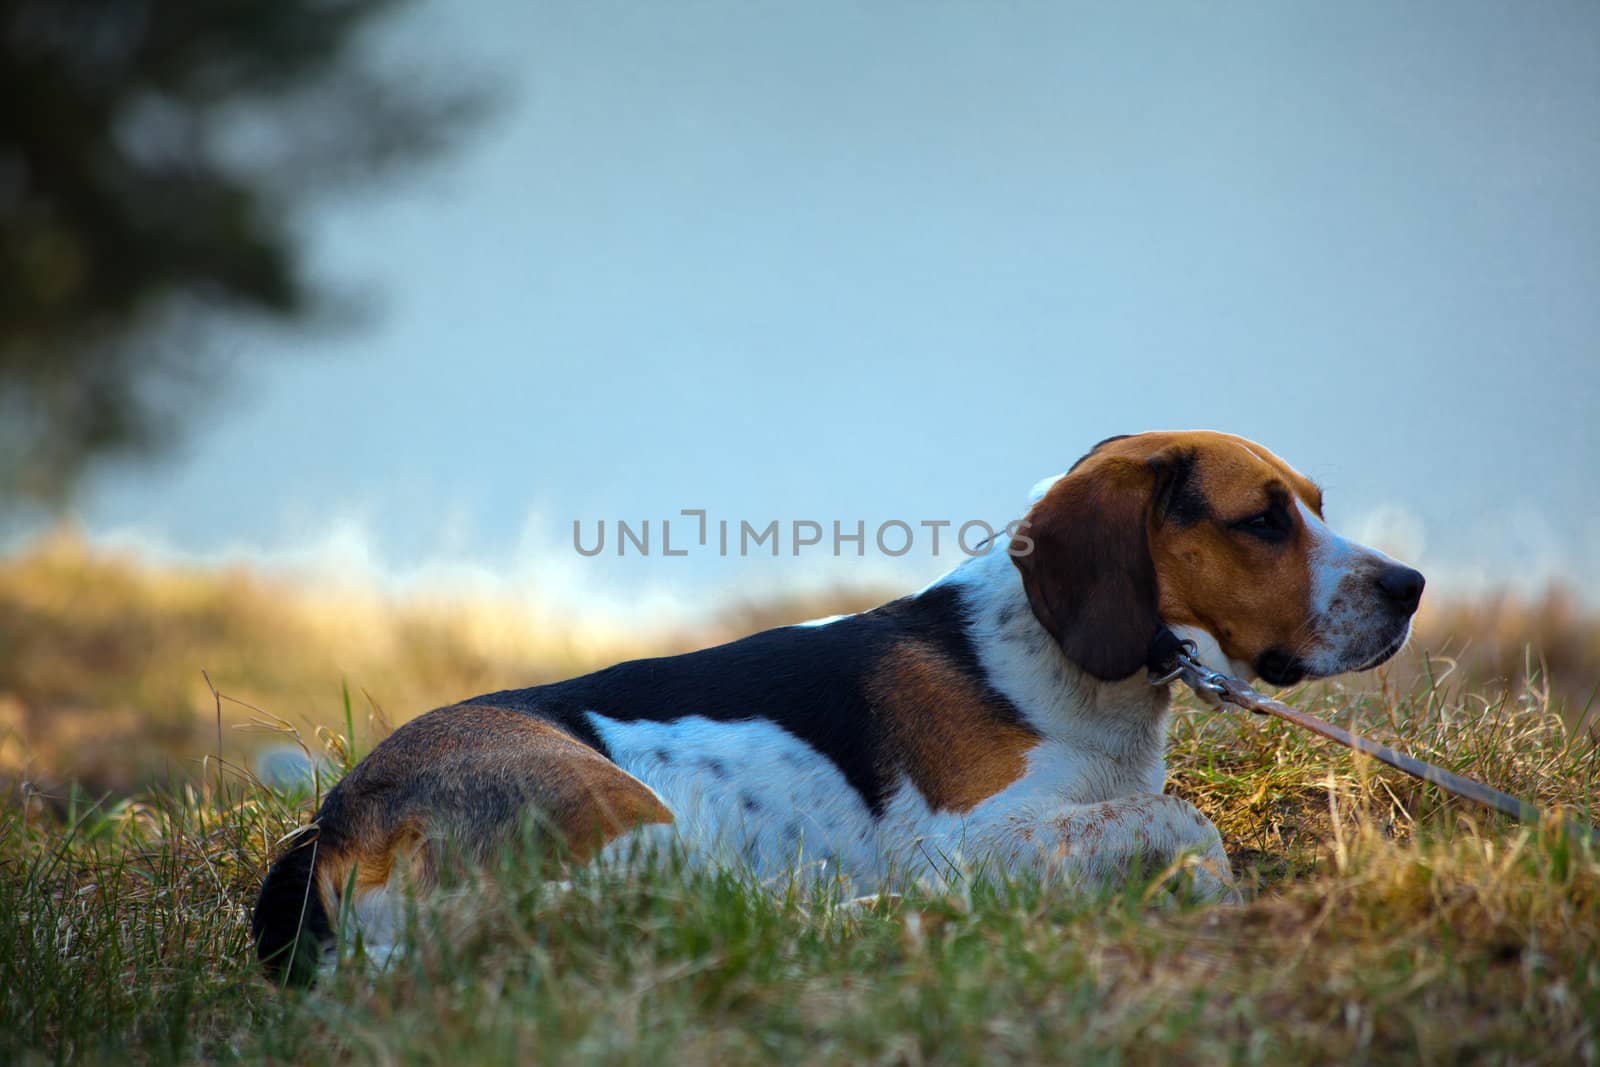 Beagle dog laying on the grass with lake in background
